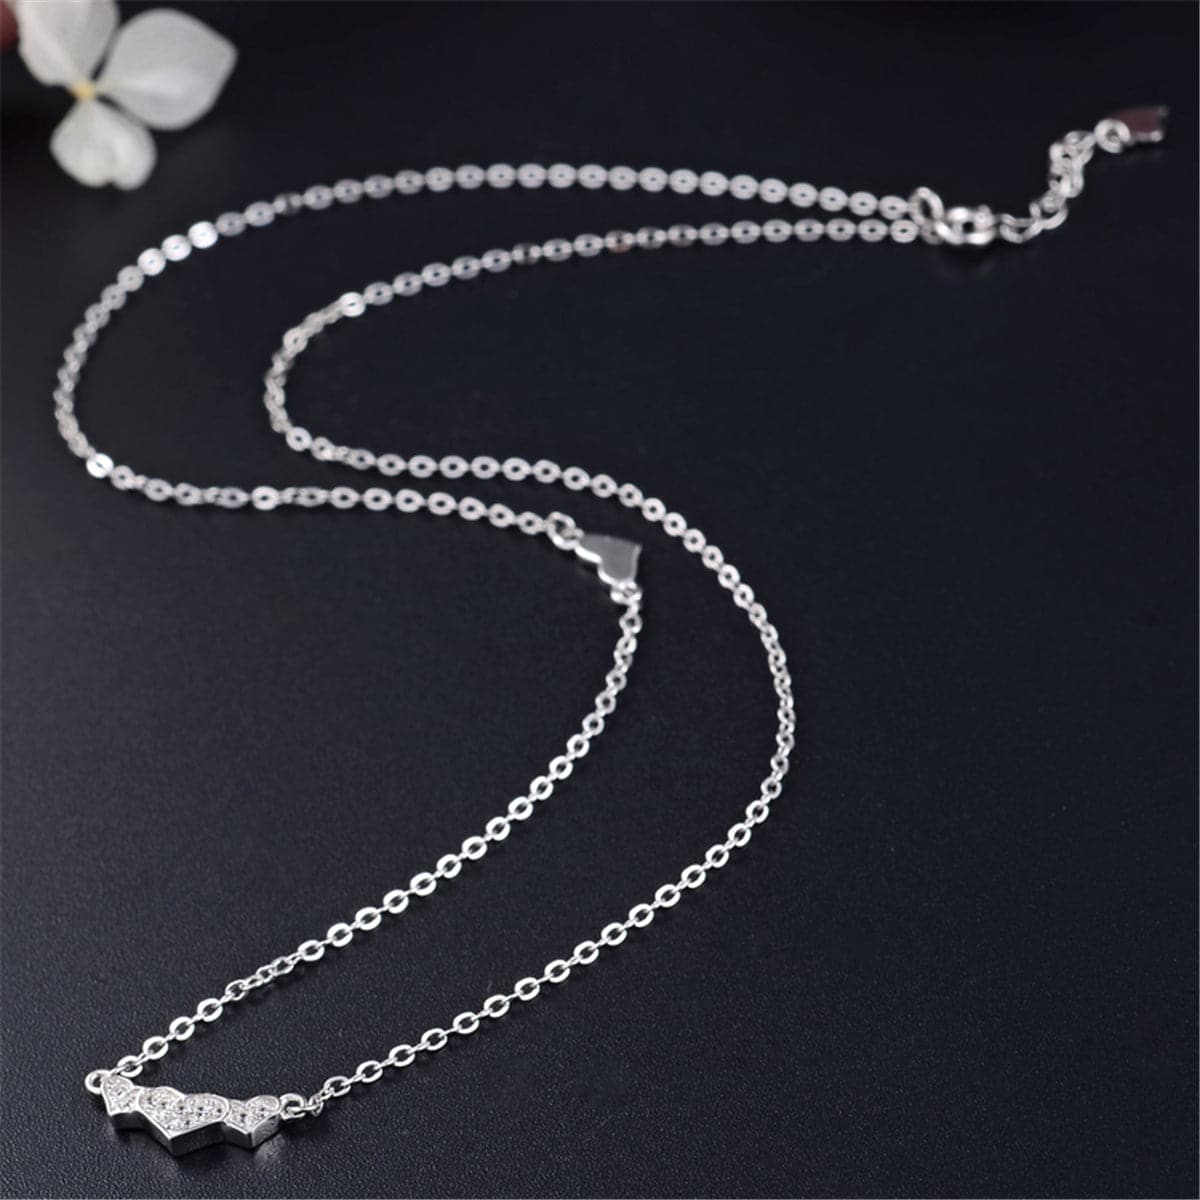 Sterling Silver & Cubic Zirconia Triple Rose Pendant Necklace